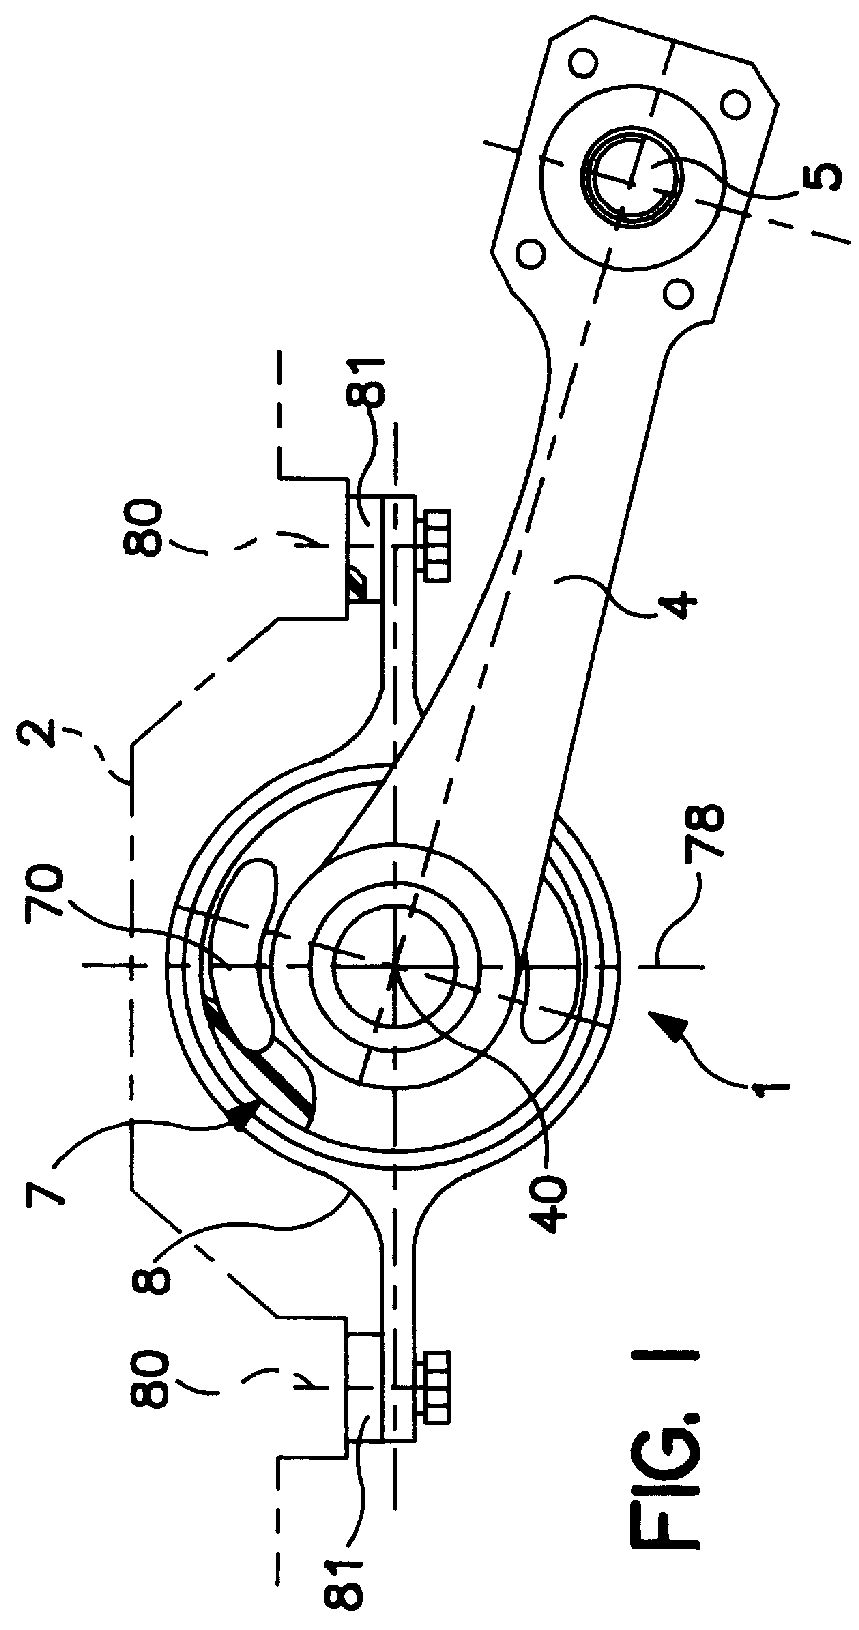 Vehicle axle equipped with torsional suspension elements